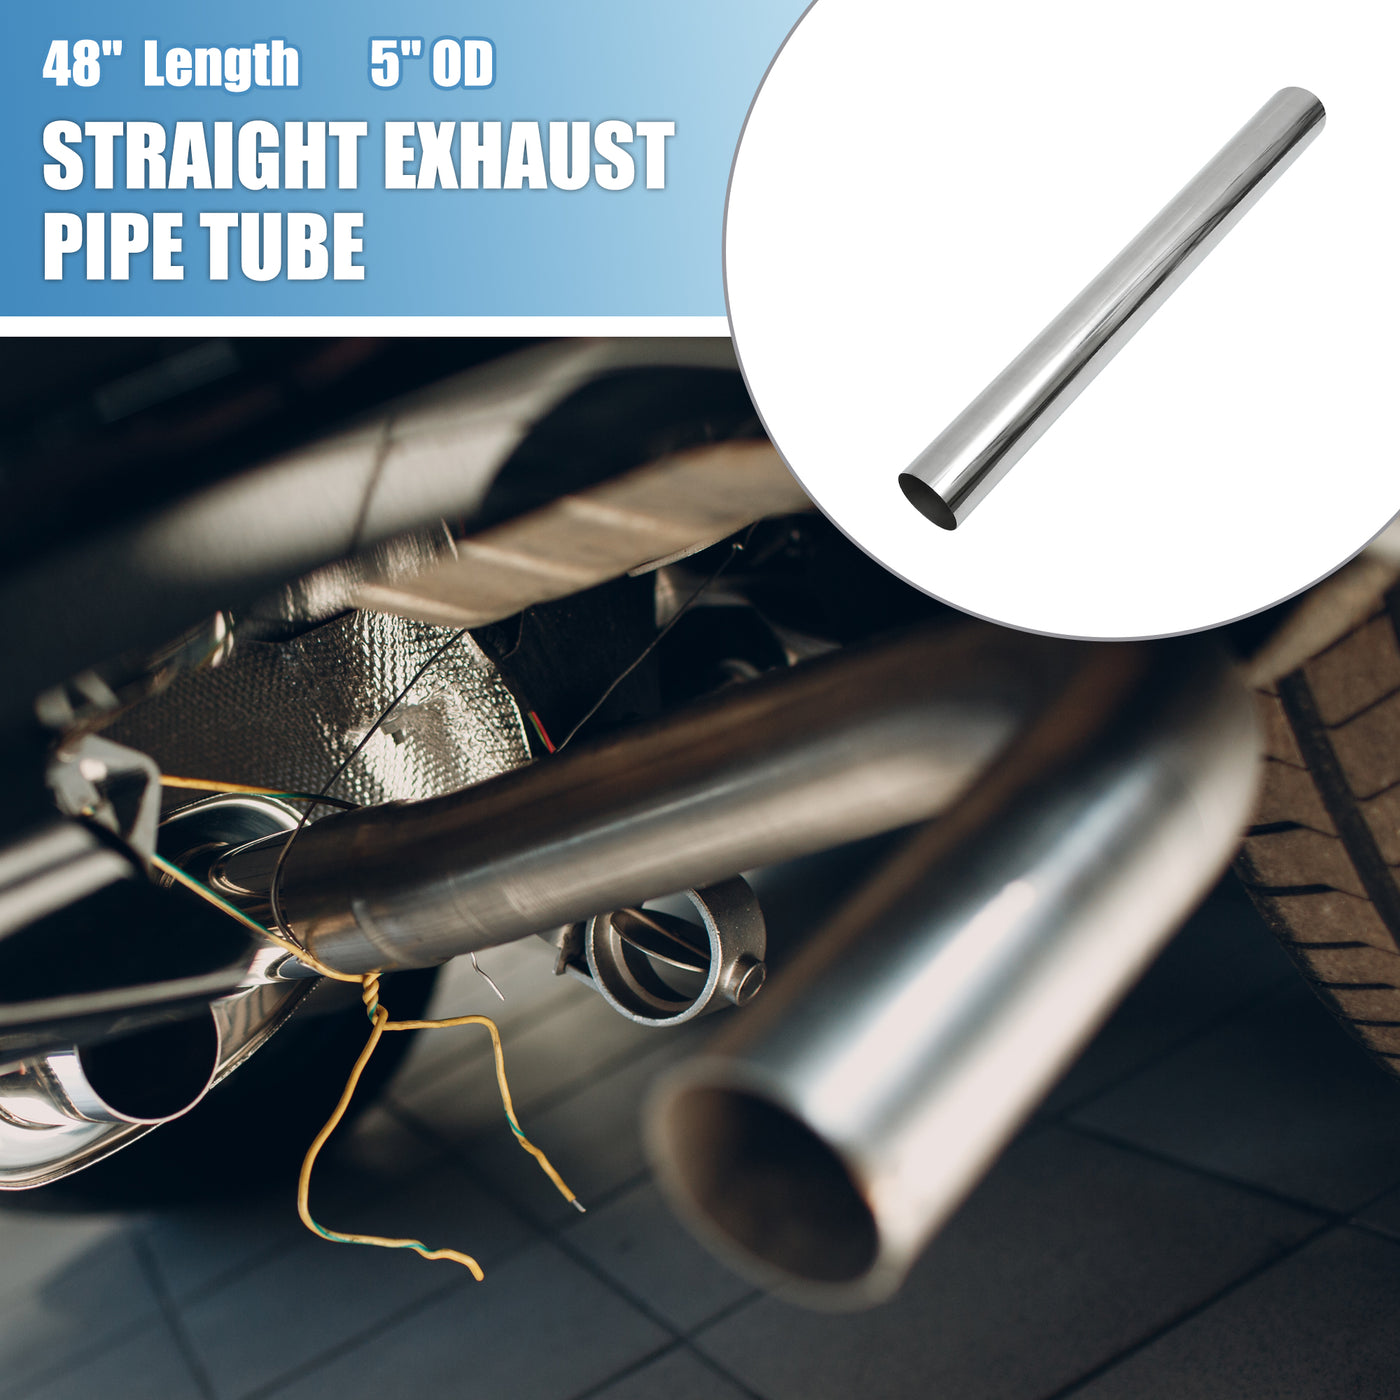 A ABSOPRO Car Mandrel Exhaust Pipe Tube Durable 48" Length 5'' OD Straight Exhaust Tube DIY Custom 0 Degree Modified Piping T304 Stainless Steel (Set of 2)